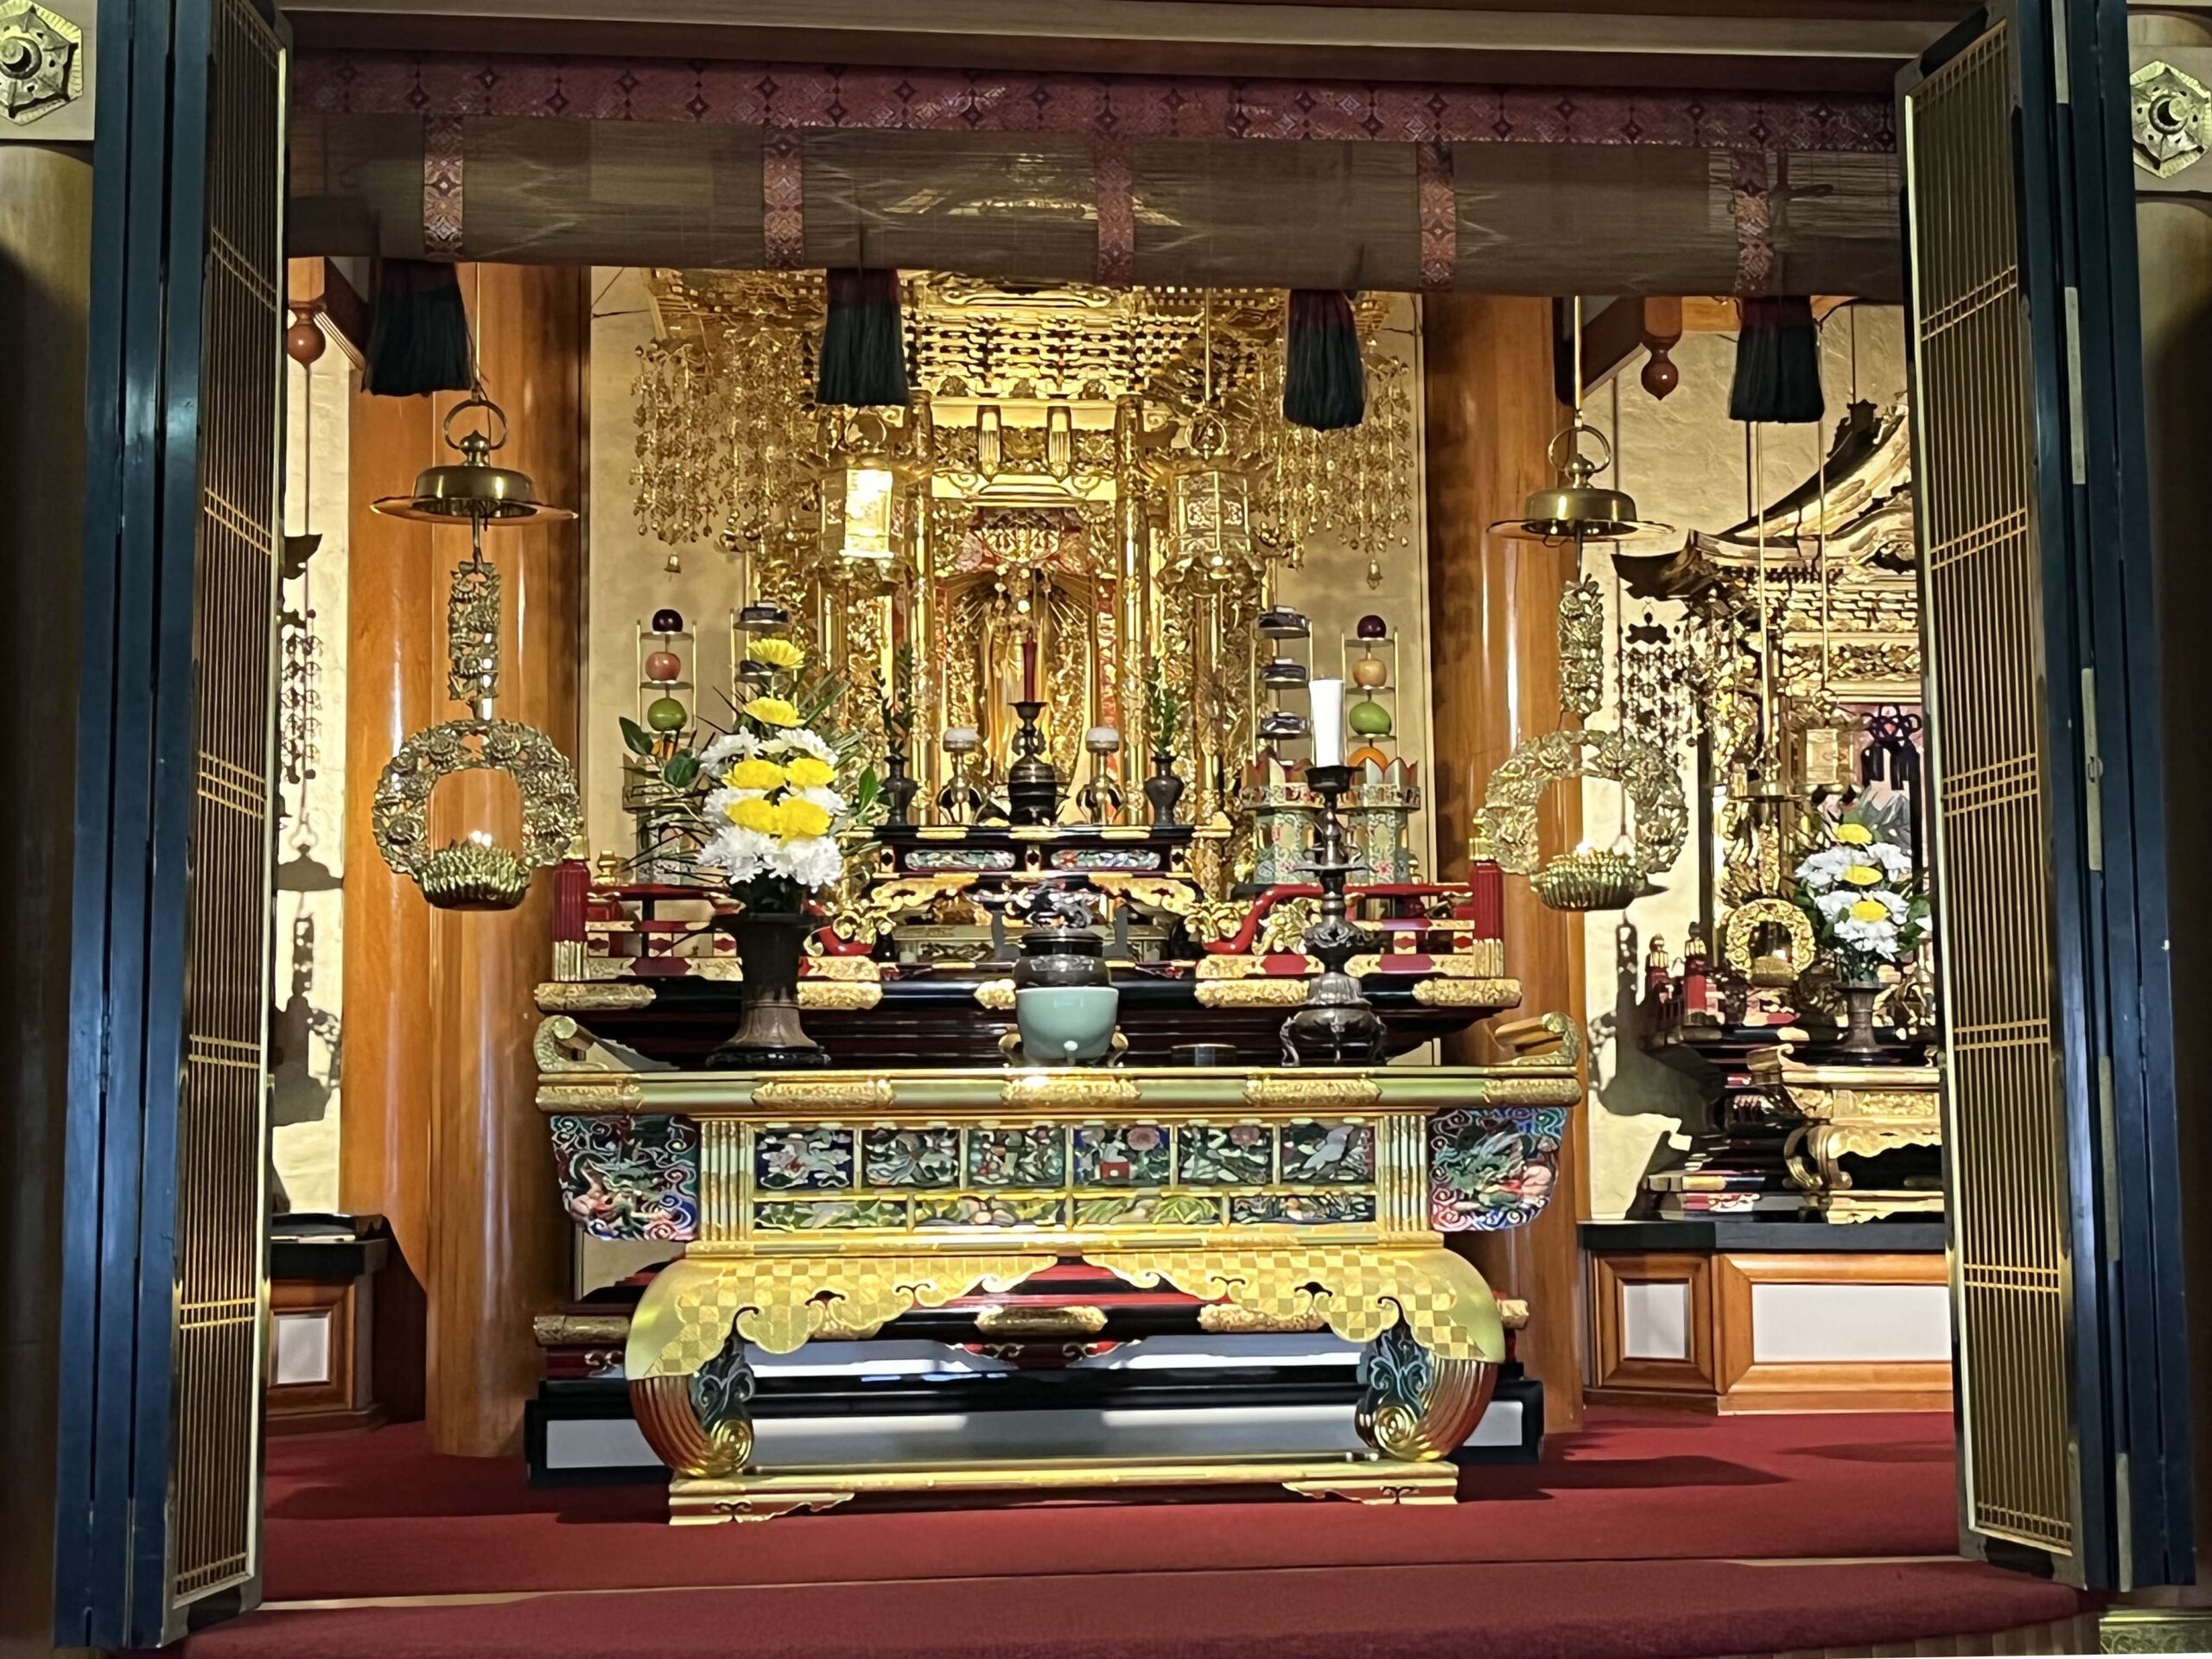 Visit to the Buddhist Temple of San Diego